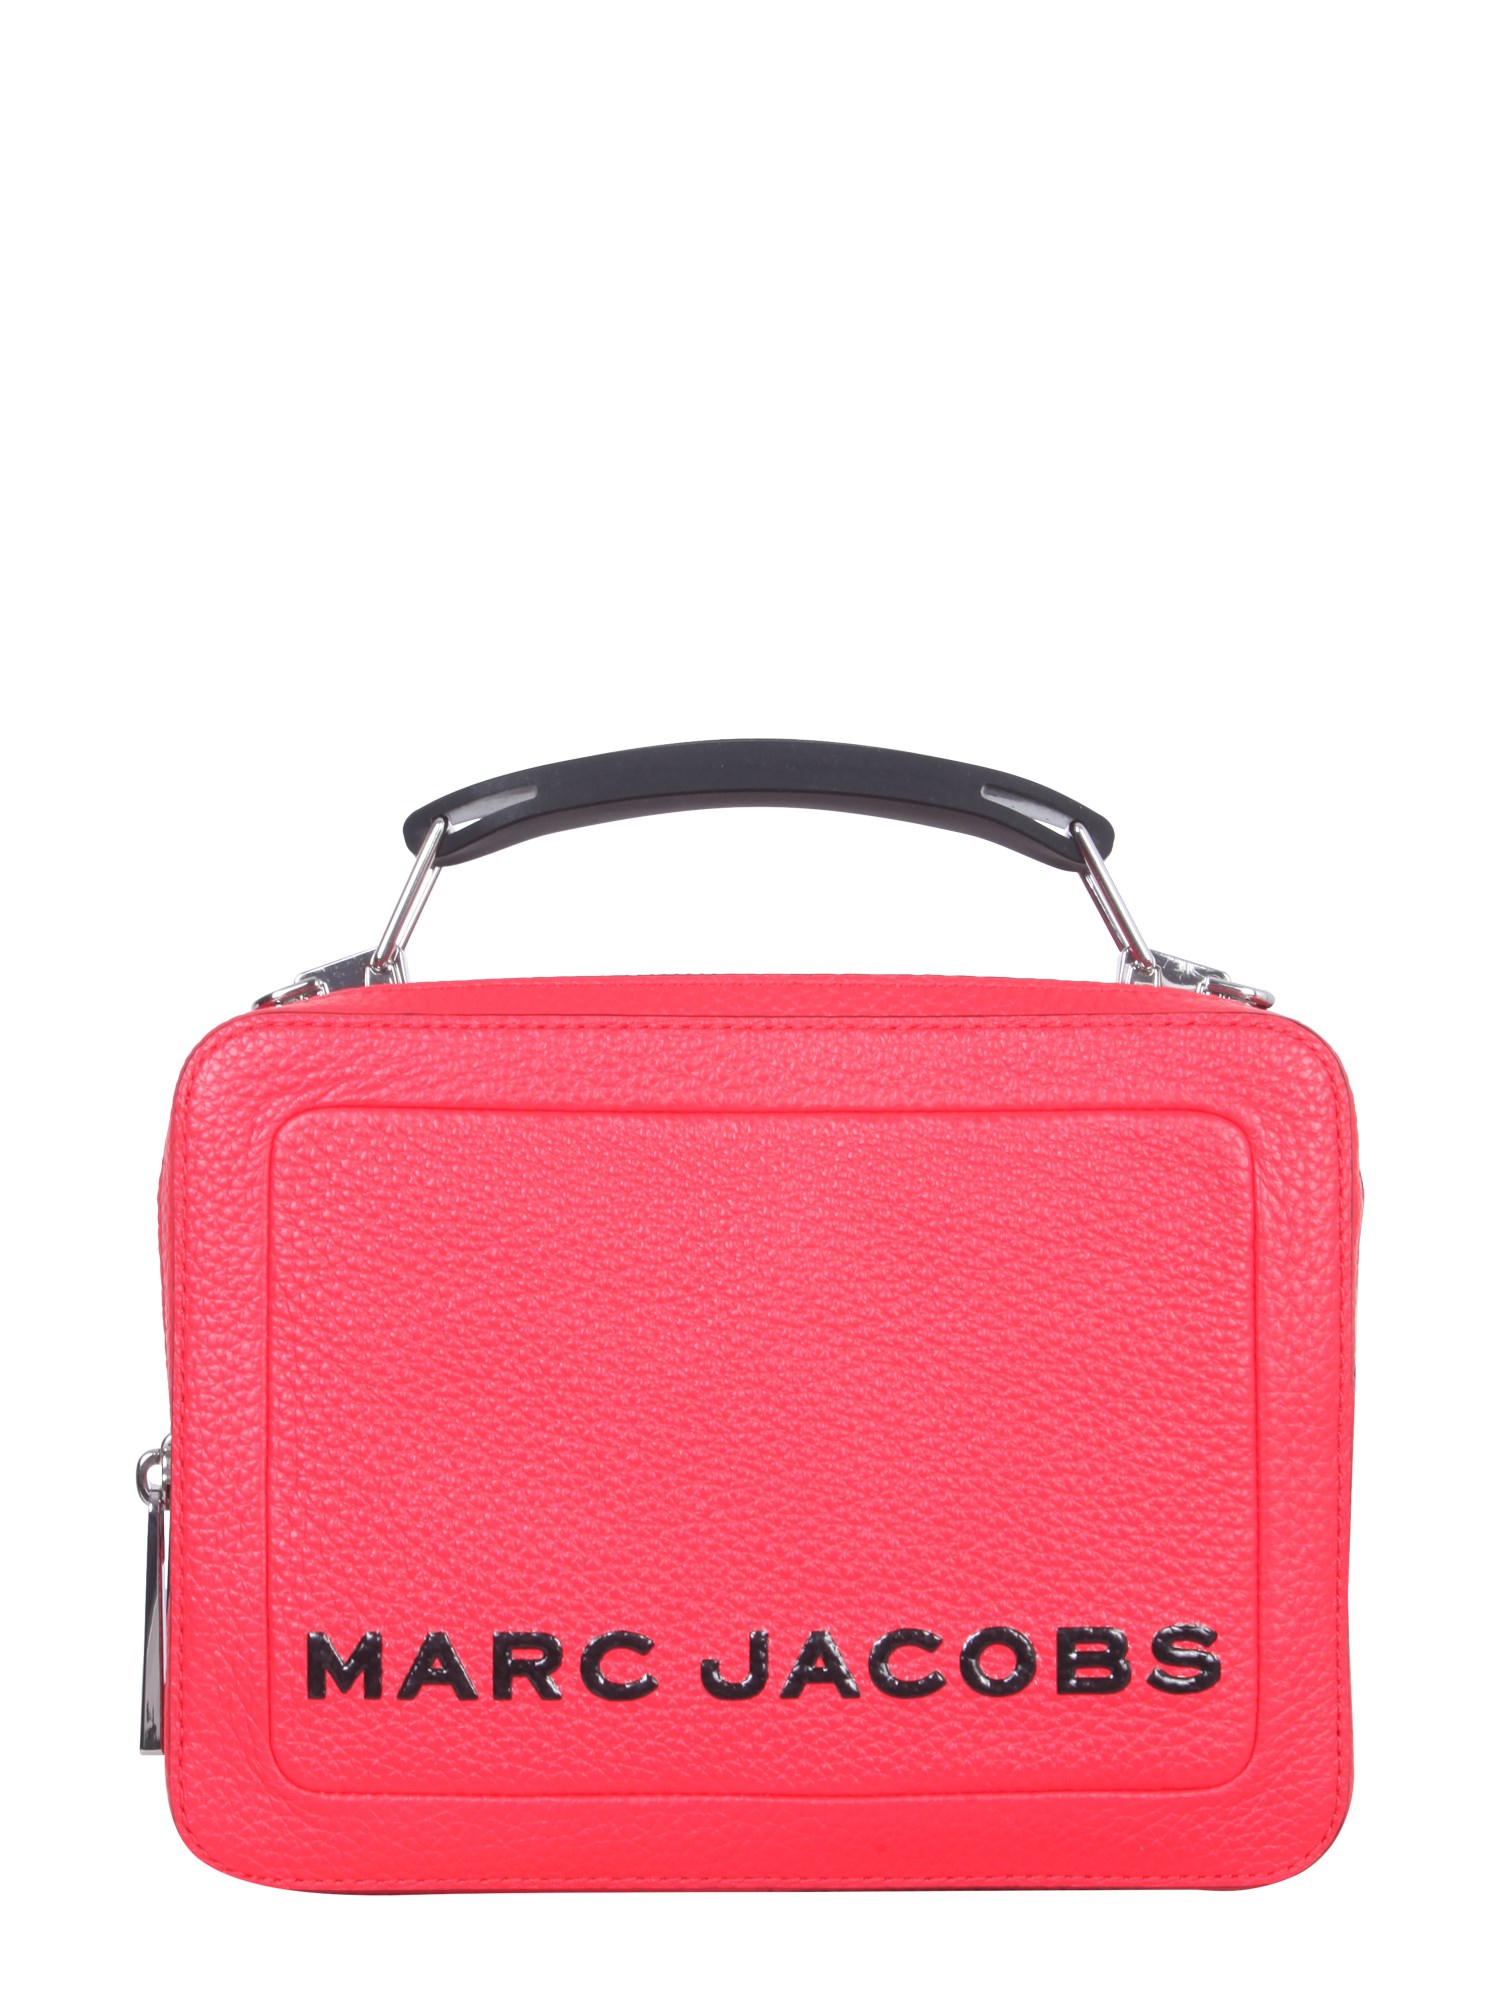 MARC JACOBS stores Barcelona | SHOPenauer